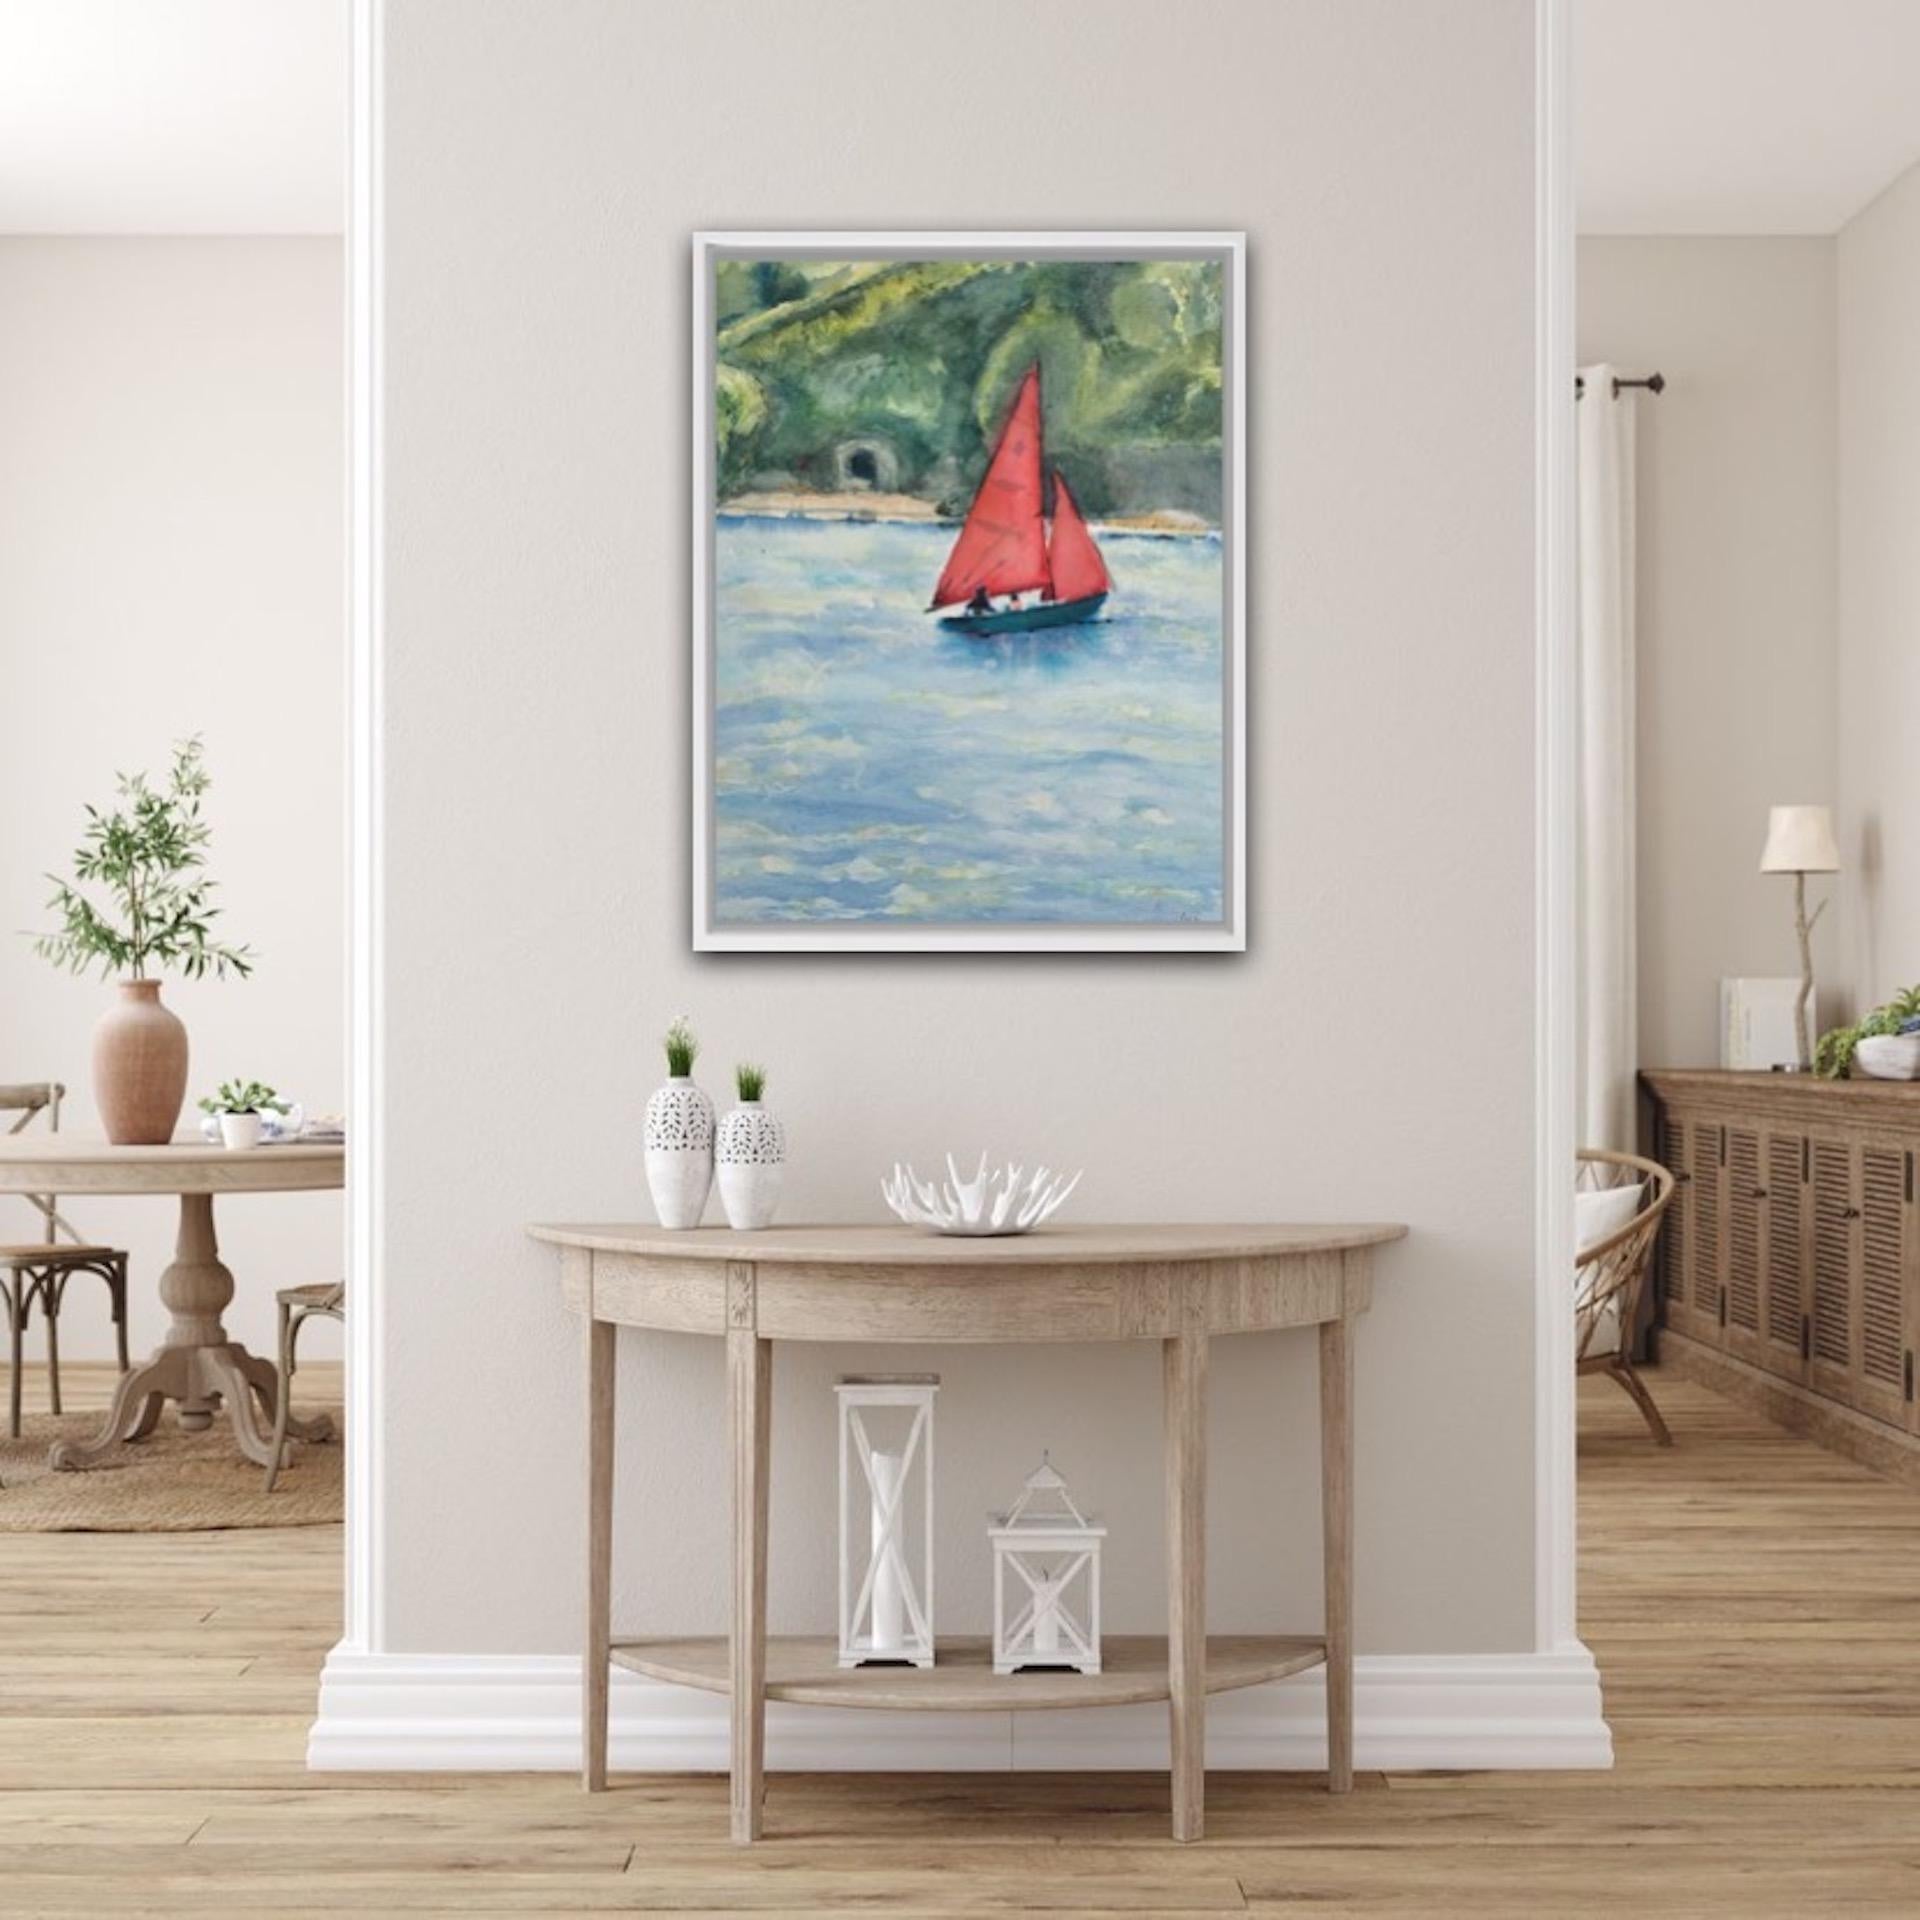 Peri Taylor
Red Sails
Watercolour and Ink on Paper
Size: H 59cm x W50cm
Sold Unframed
(Please note that in situ images are purely an indication of how a piece may look).

Red Sails is an original watercolour and ink work by Peri Taylor. The work